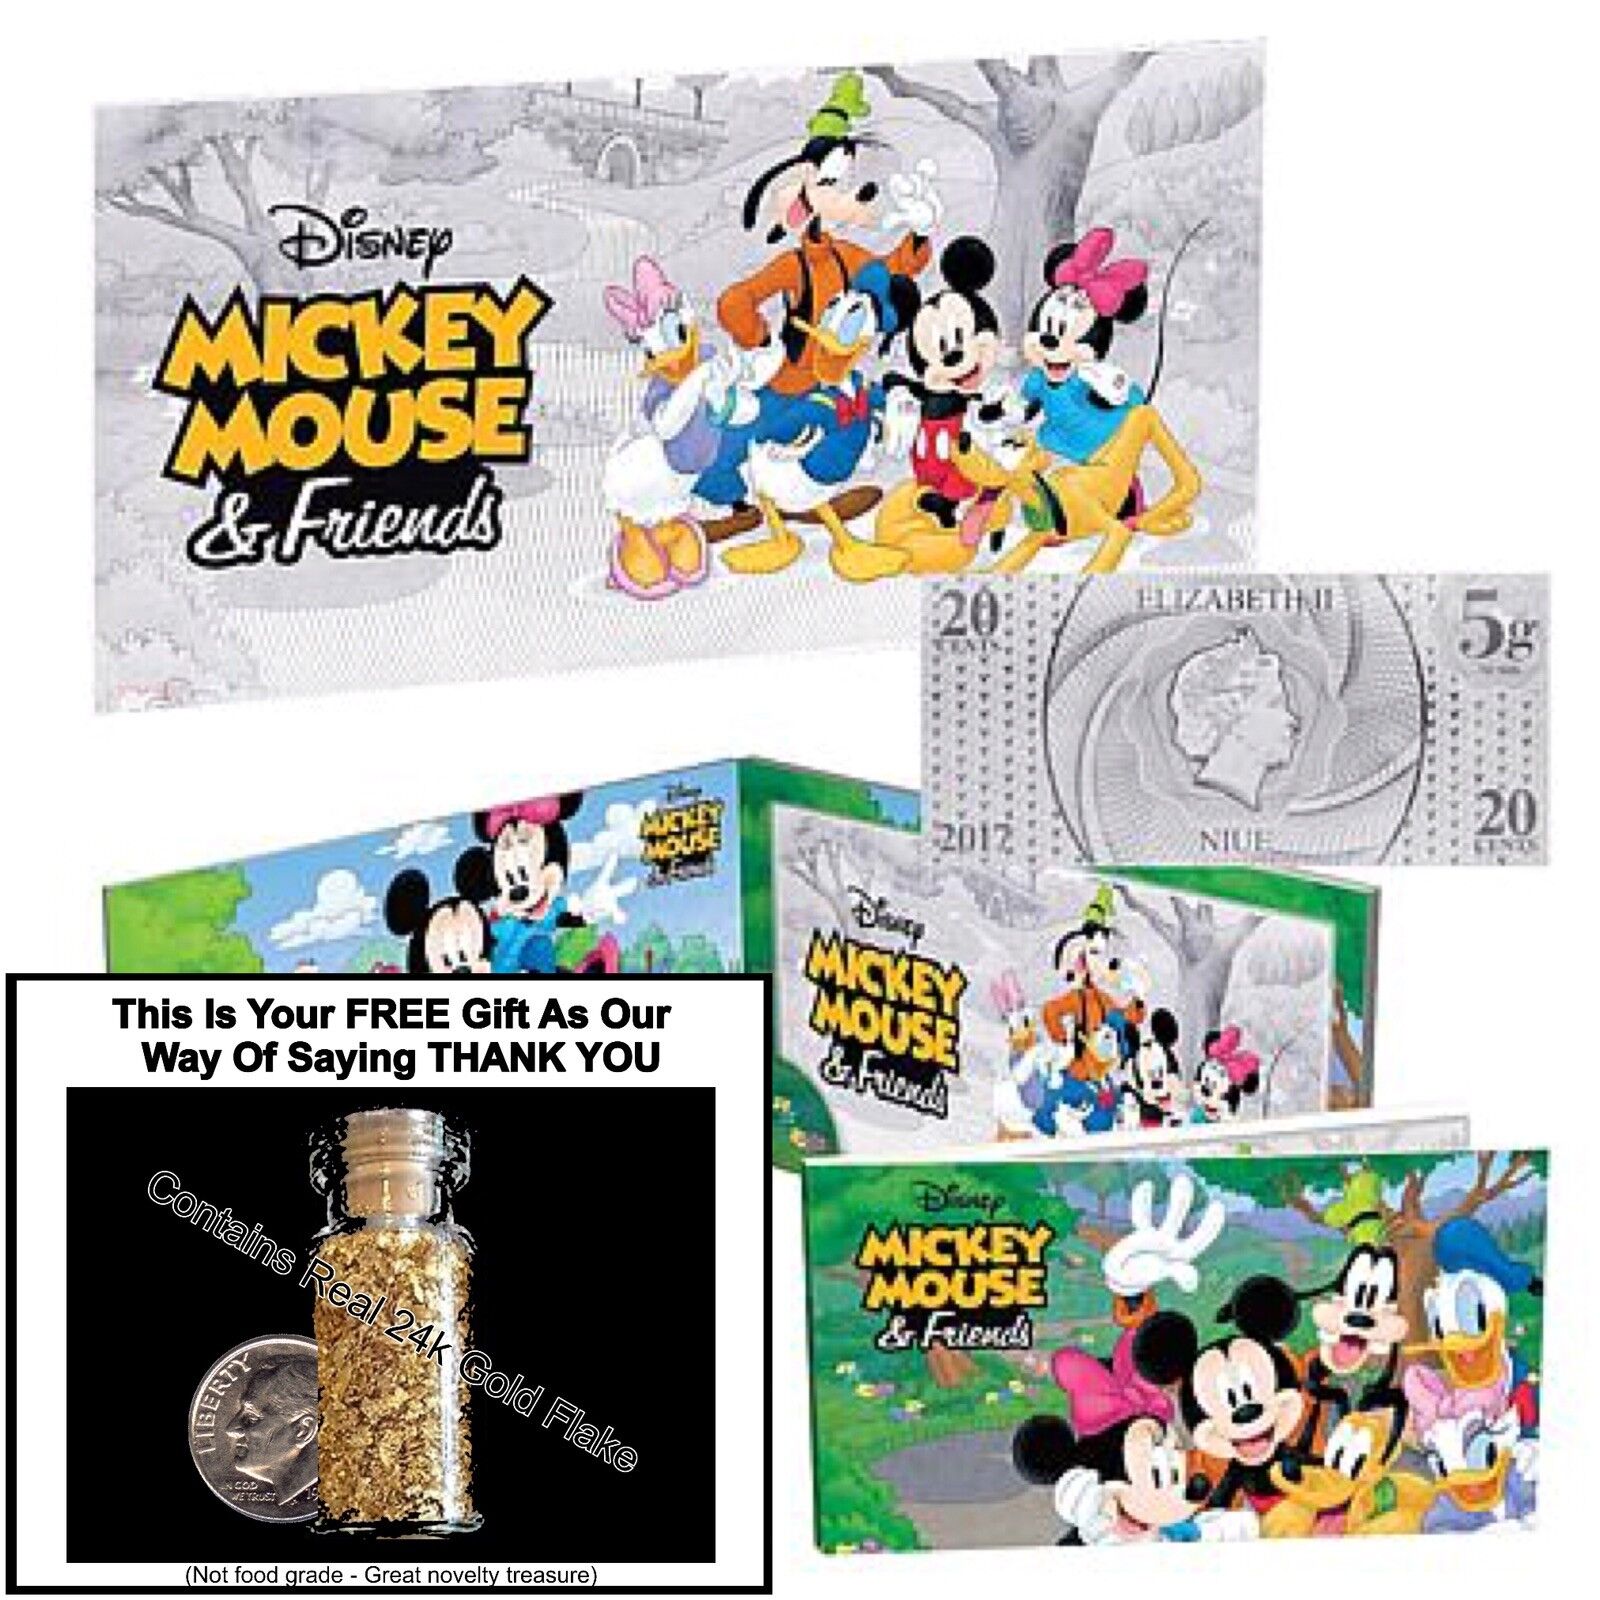 2017 Niue Disney Mickey Mouse & Friends 5g Silver Foil 20c Note - FREE GIFT INC